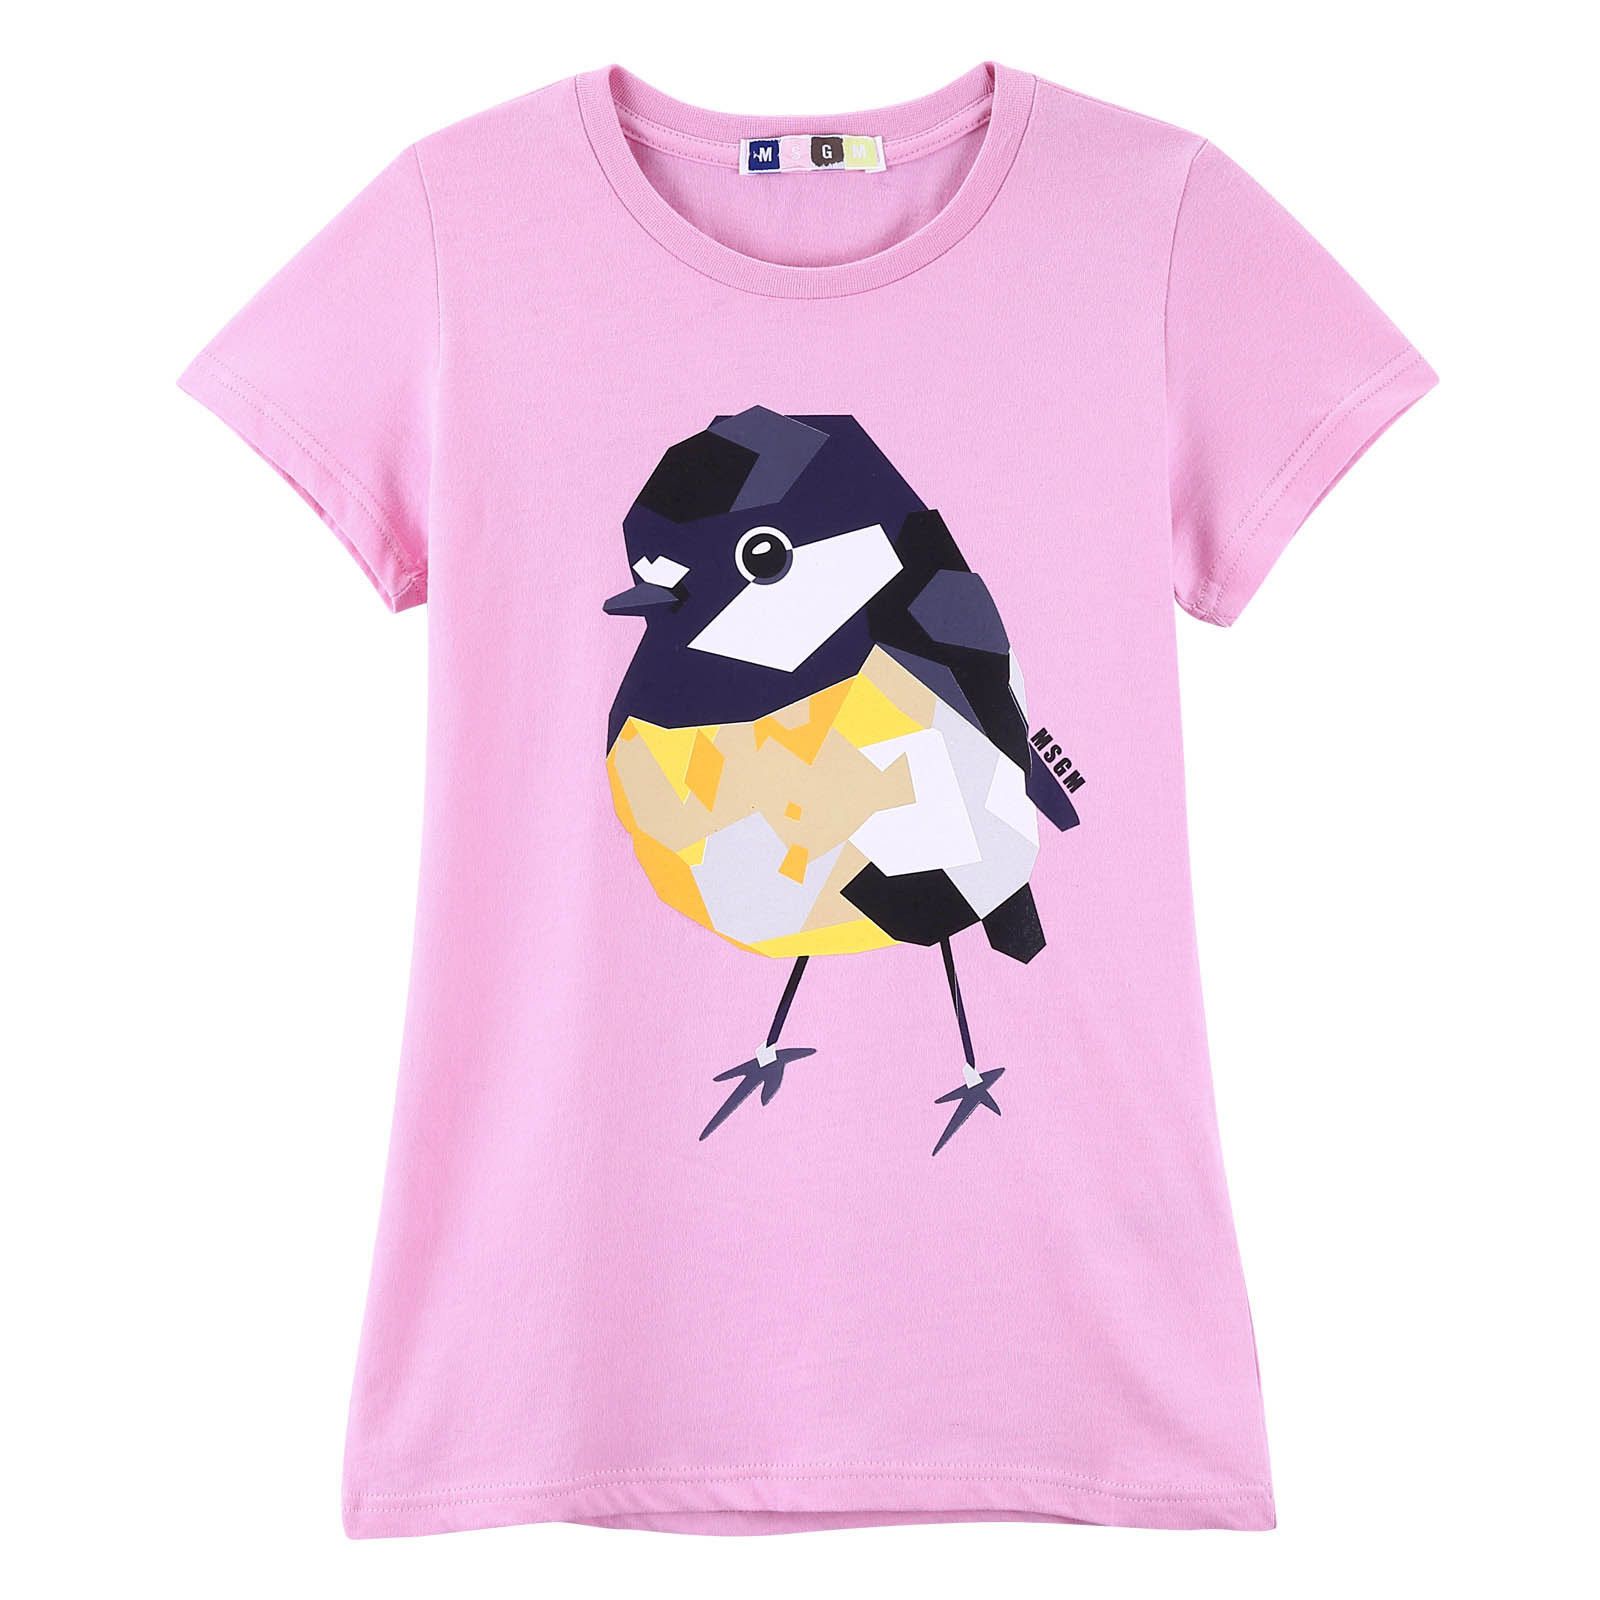 Girls Pink Cotton T-Shirt With Multicolor Chick Prin - CÉMAROSE | Children's Fashion Store - 1